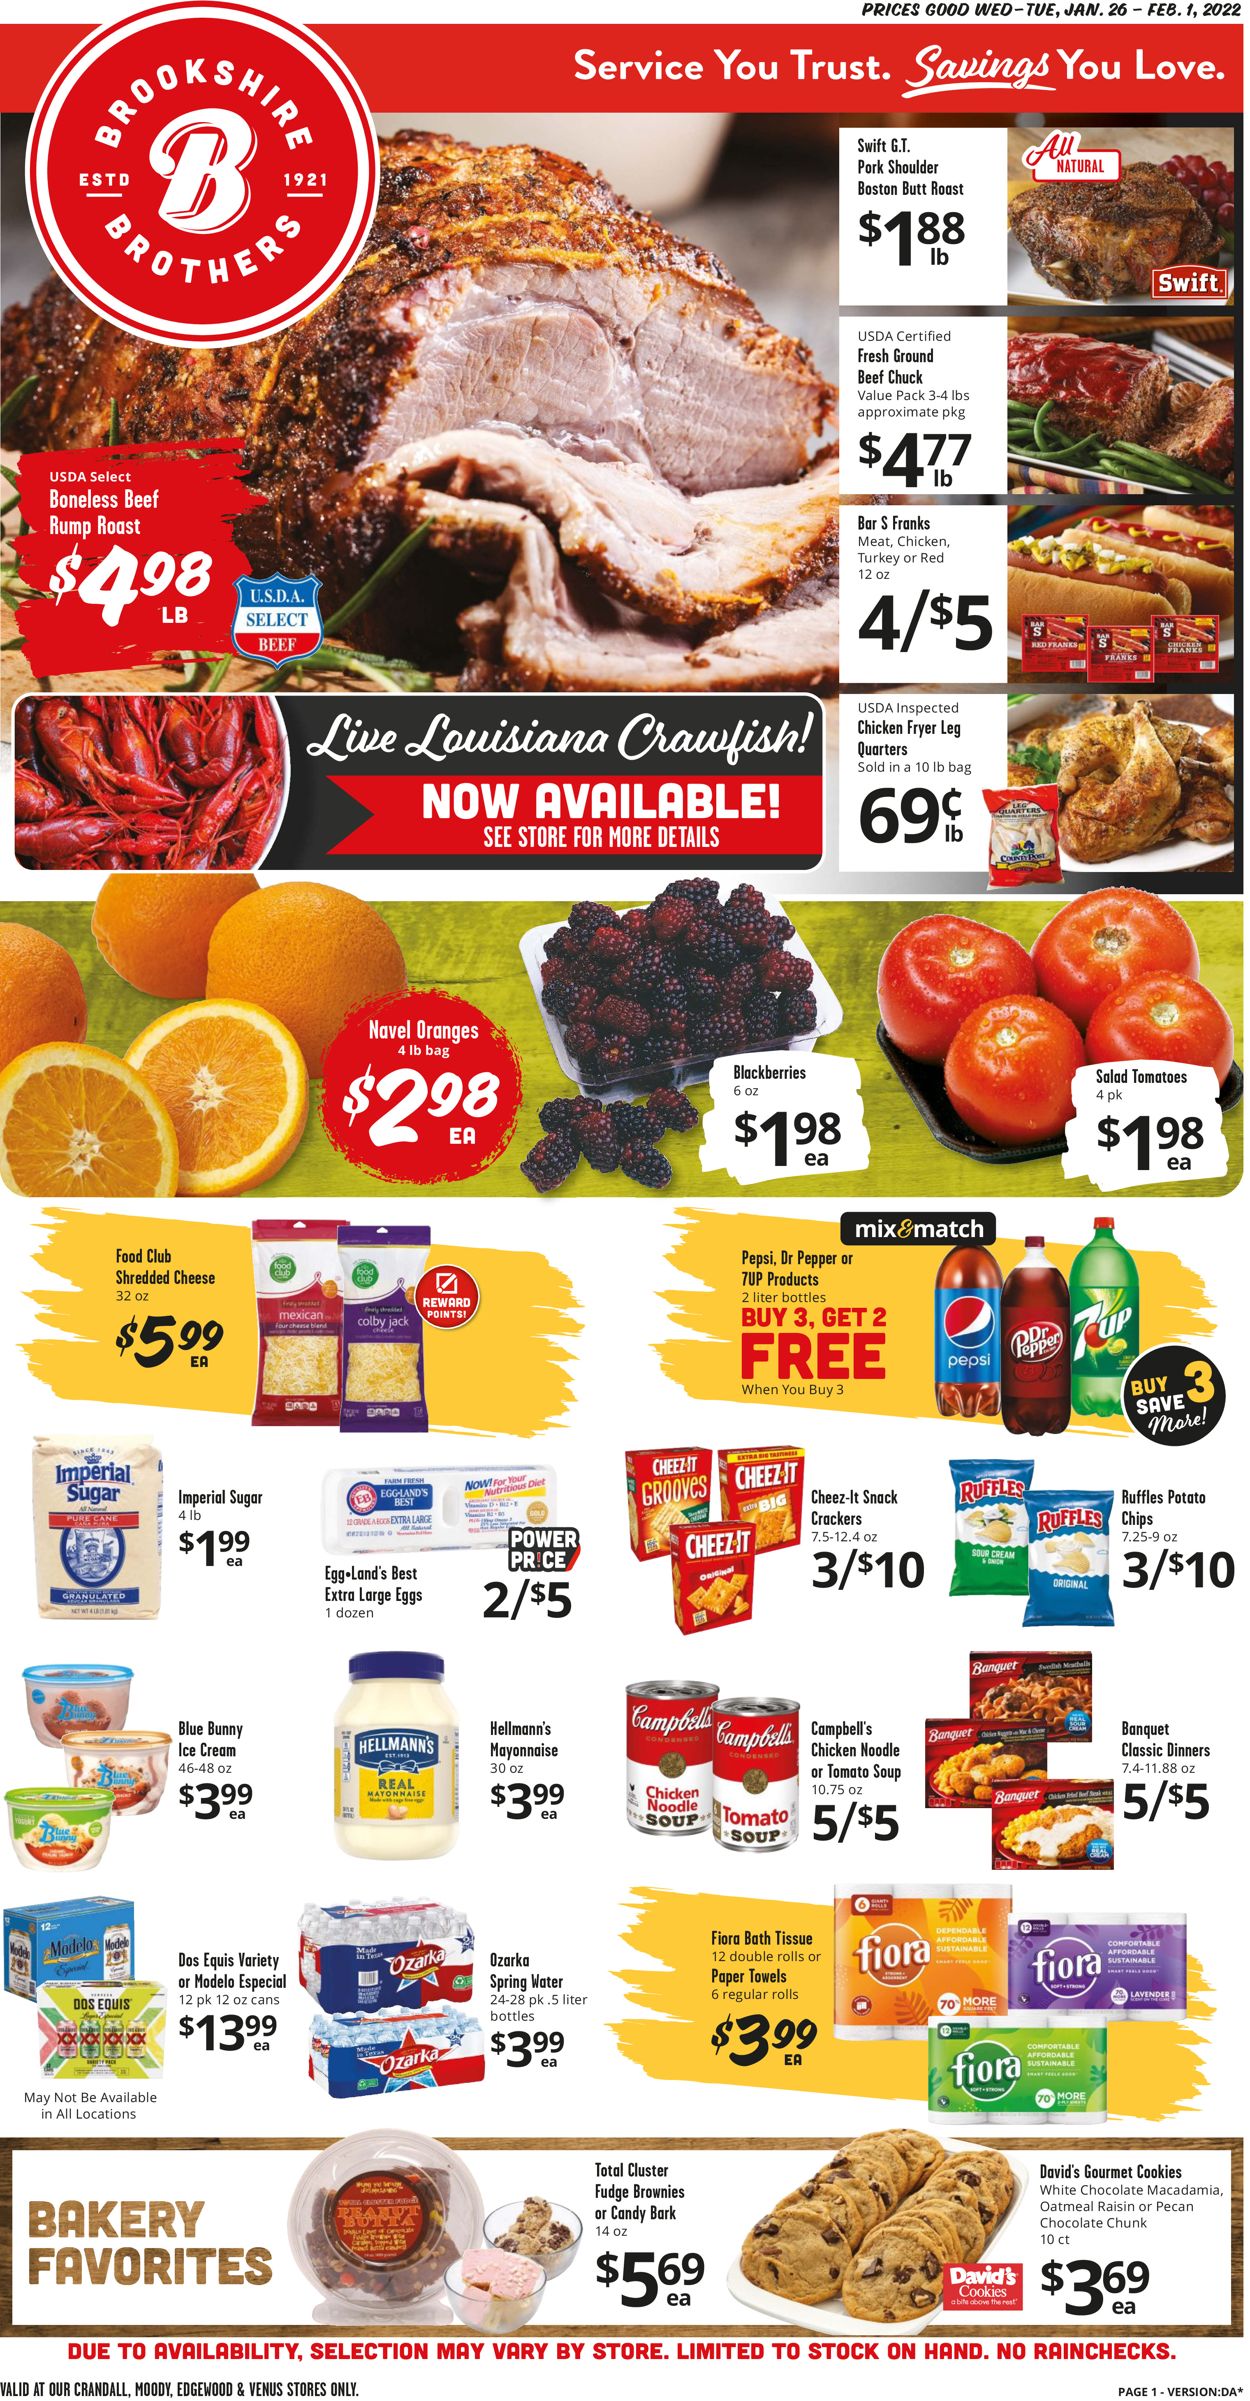 Brookshire Brothers Current weekly ad 01/26 - 02/01/2022 - frequent-ads.com